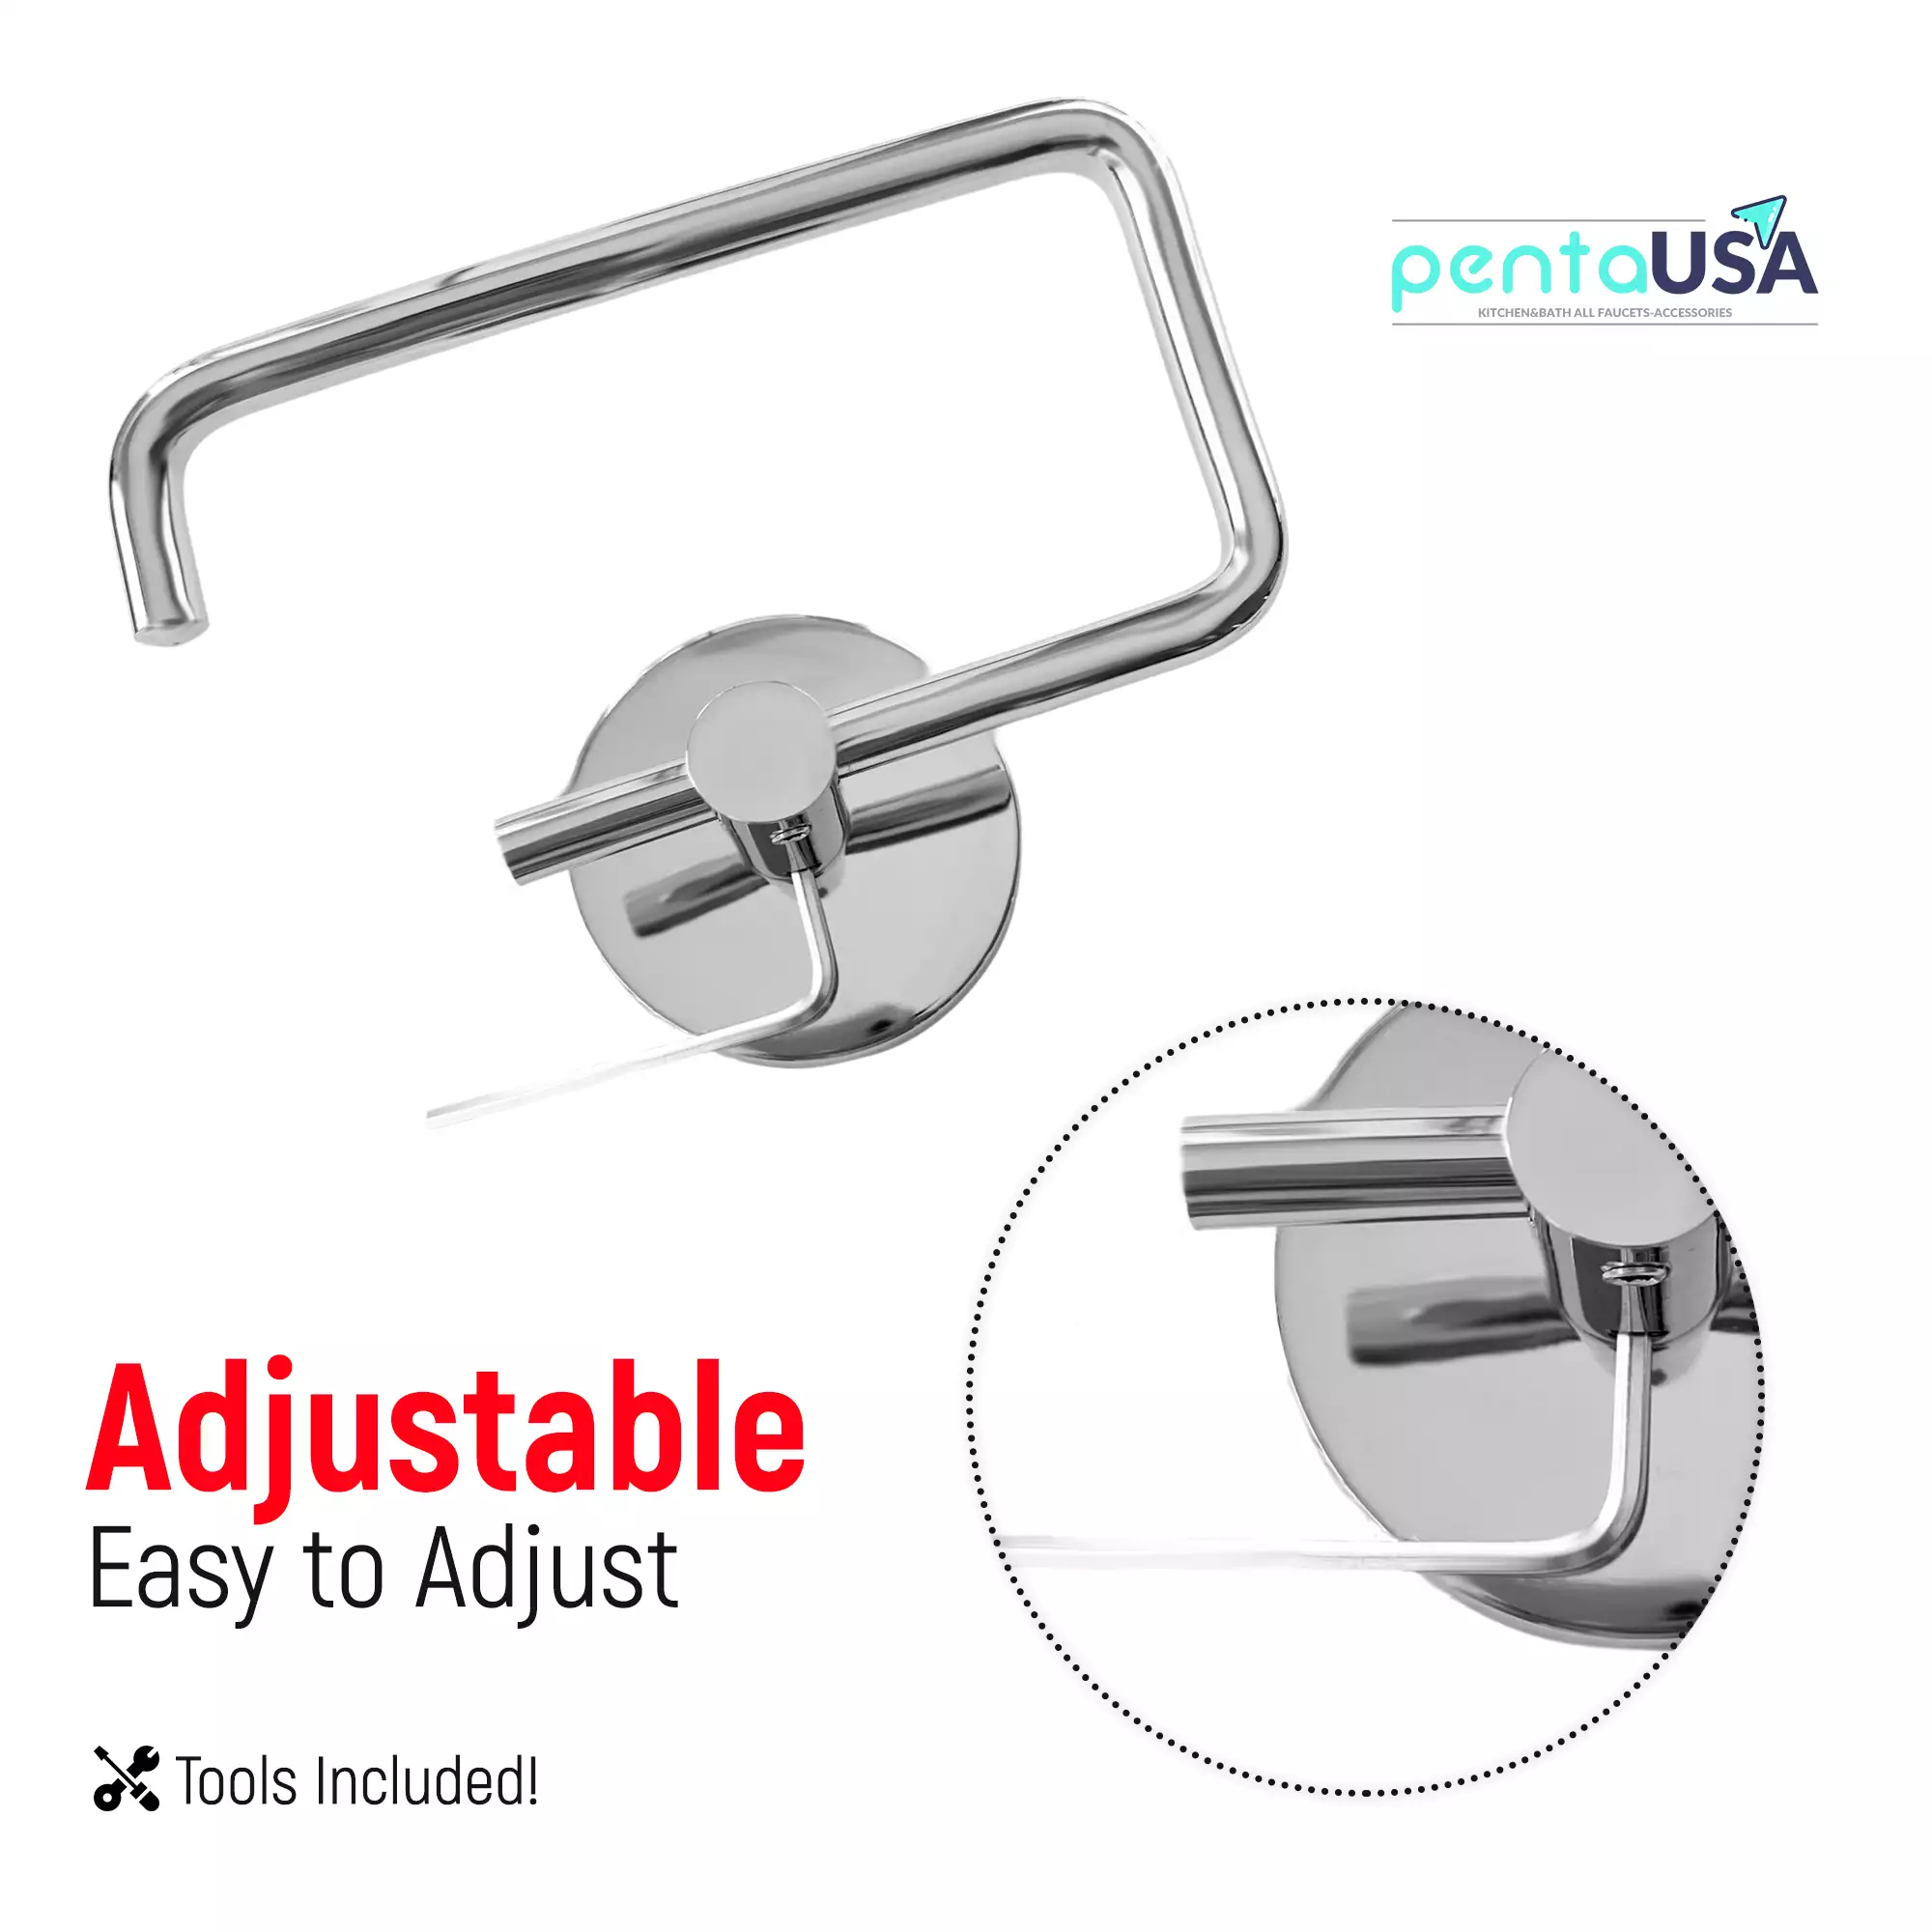 Stainless Steel Suction Cup Paper Towel Holder Spare Toilet Paper Holder USA